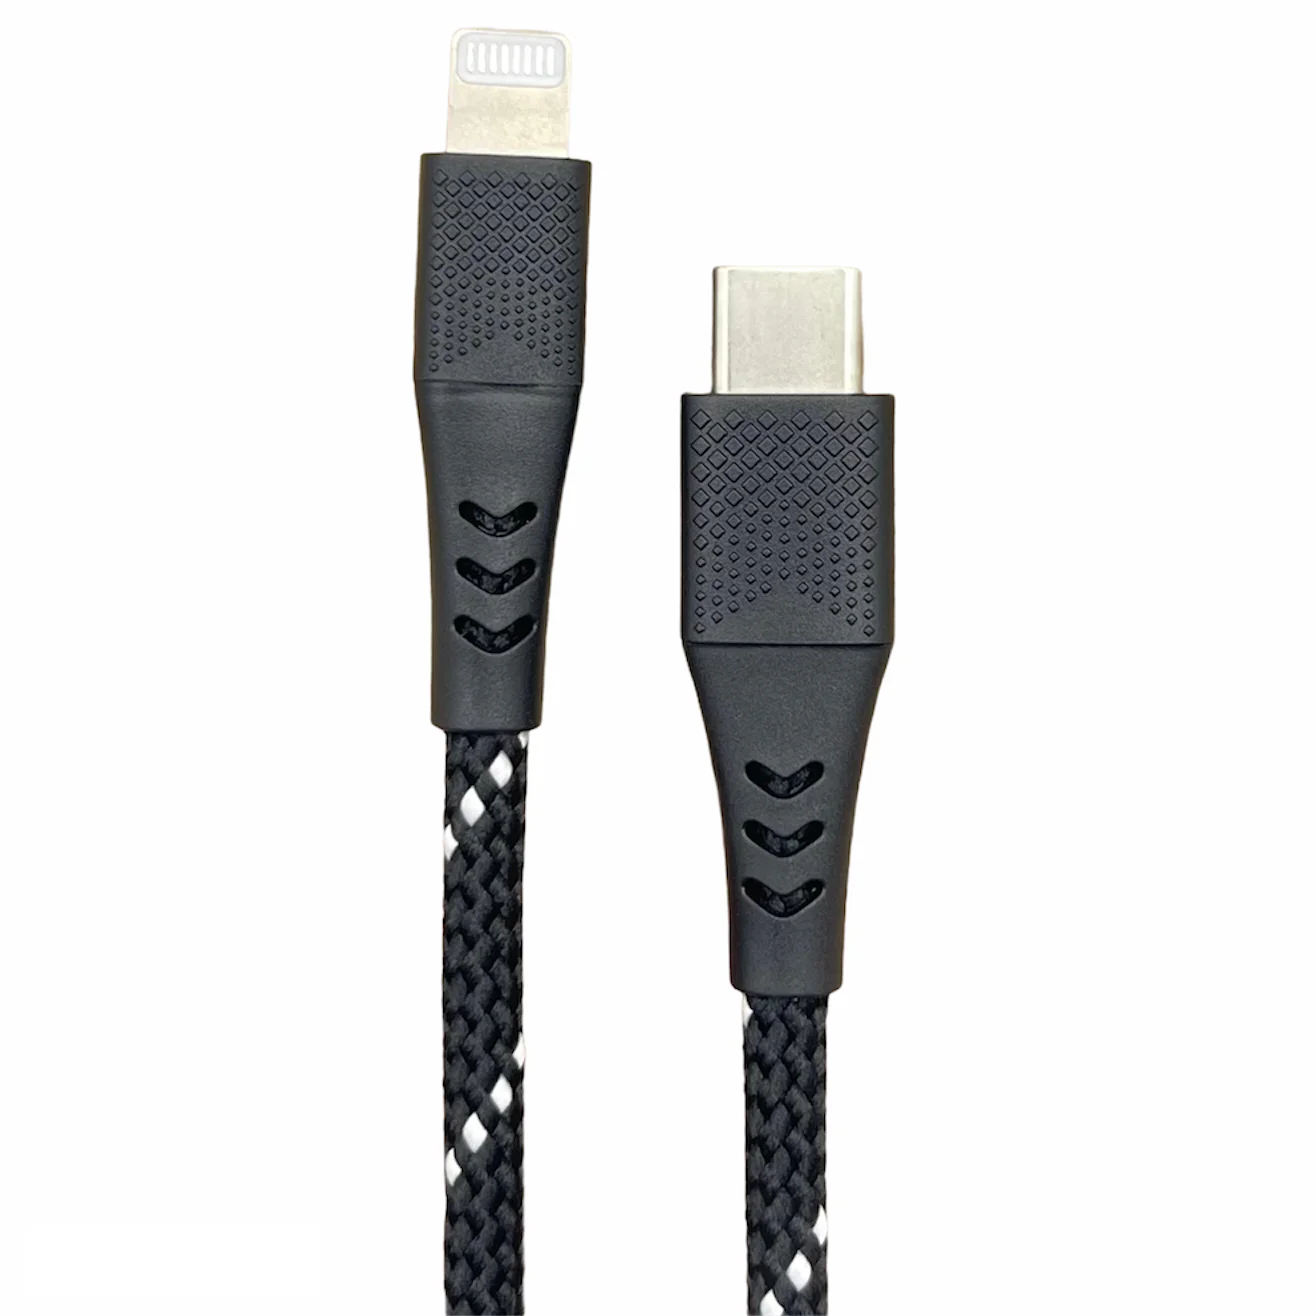 Premium Usb Cable MFi certified fast charging, USB-C to Lightning (C94) 1M, 2M, 3M for iPhone data cable